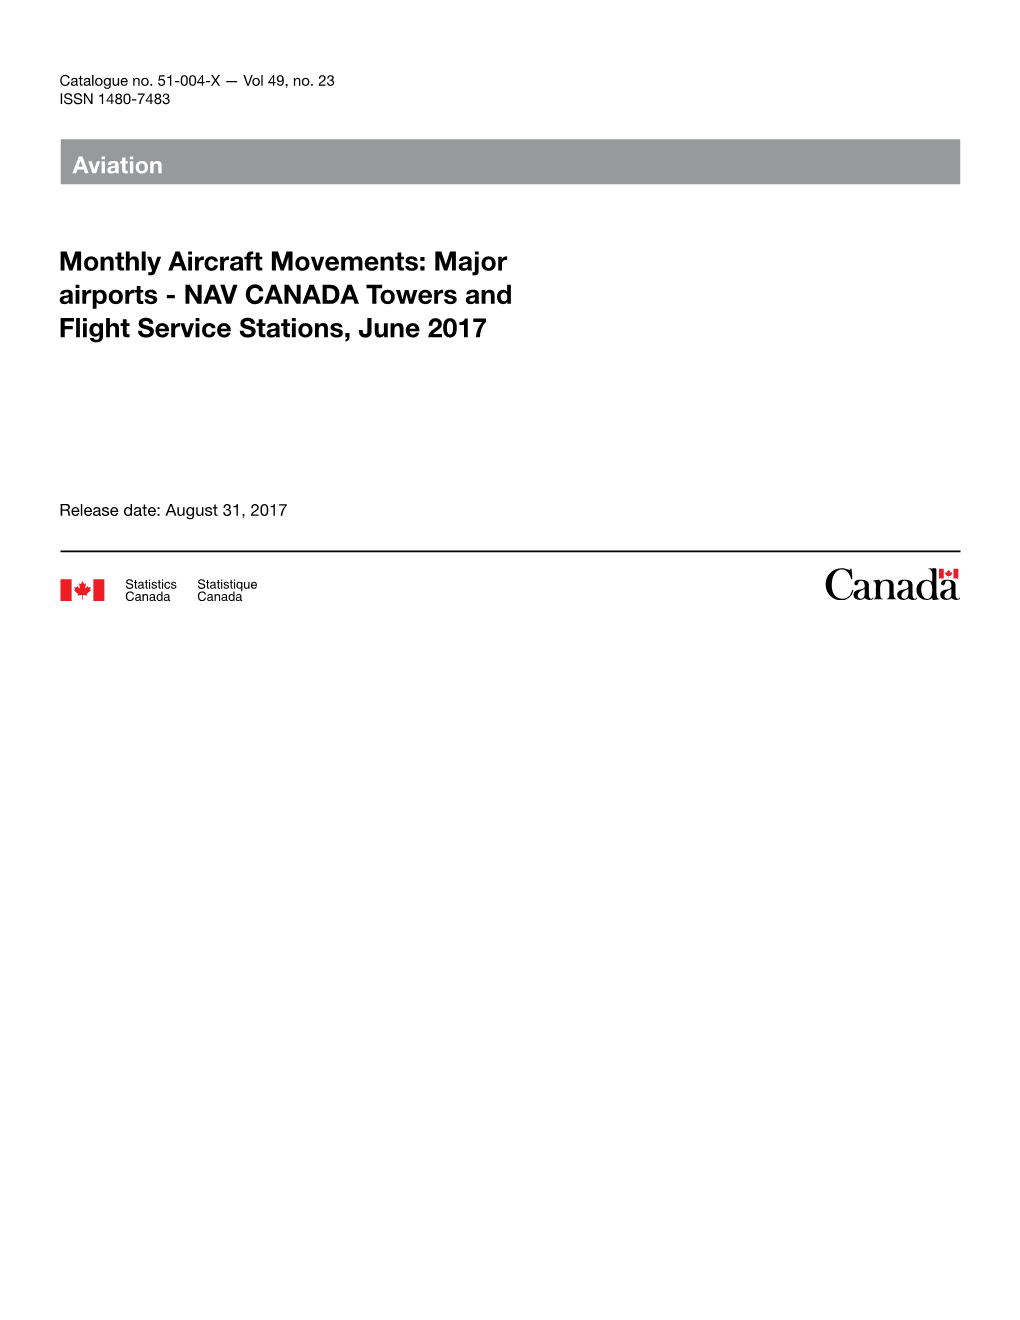 Monthly Aircraft Movements: Major Airports – NAV CANADA Towers and Flight Service Stations, June 2017